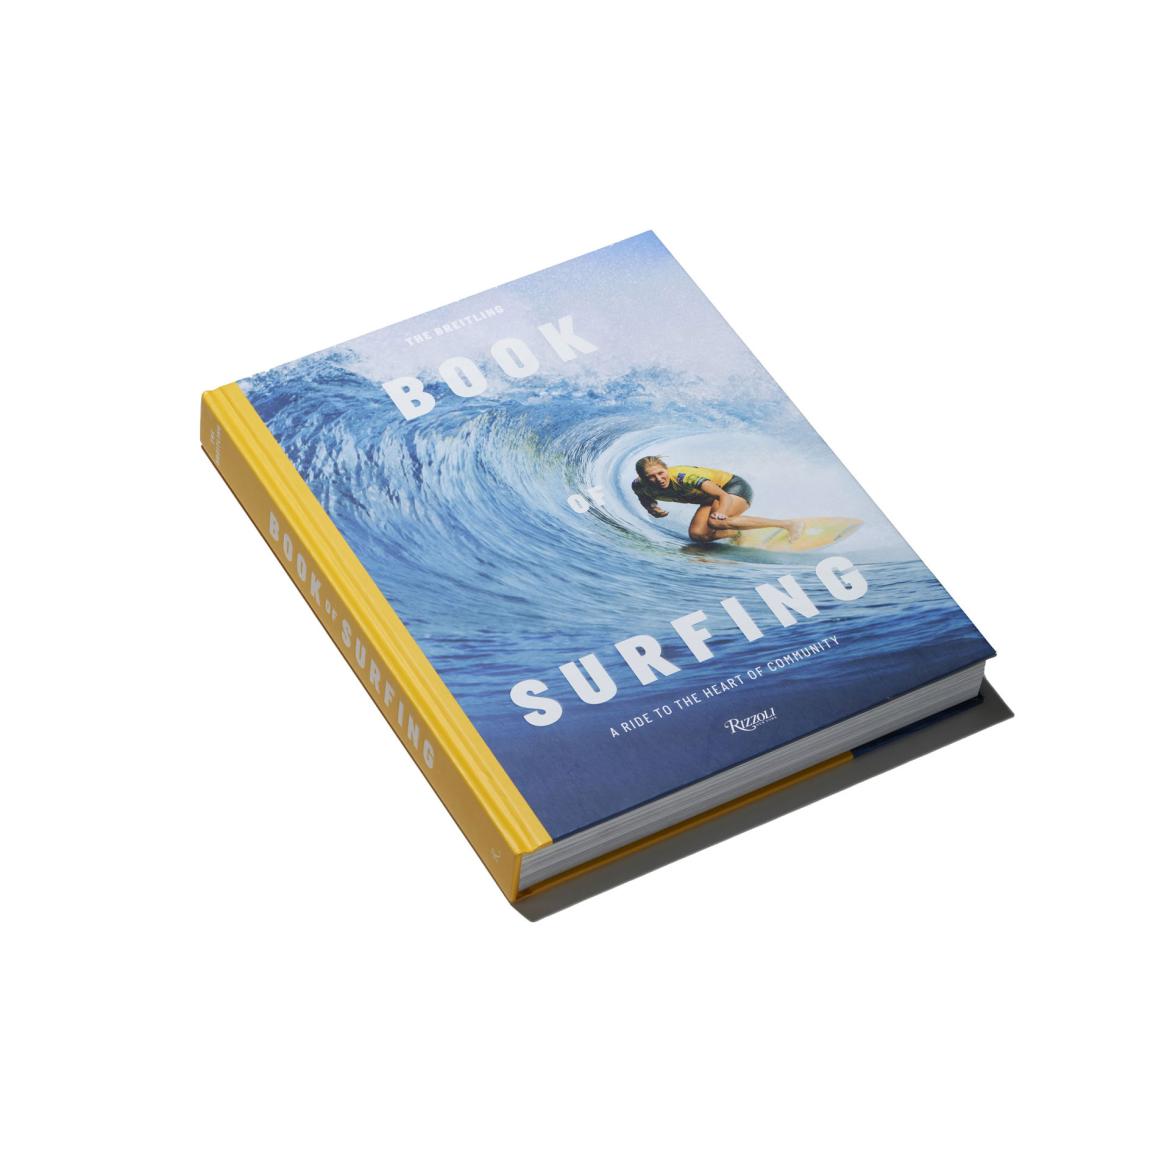 The Breitling Book of Surfing - ISBN 978-88-918399-9-2 ENG